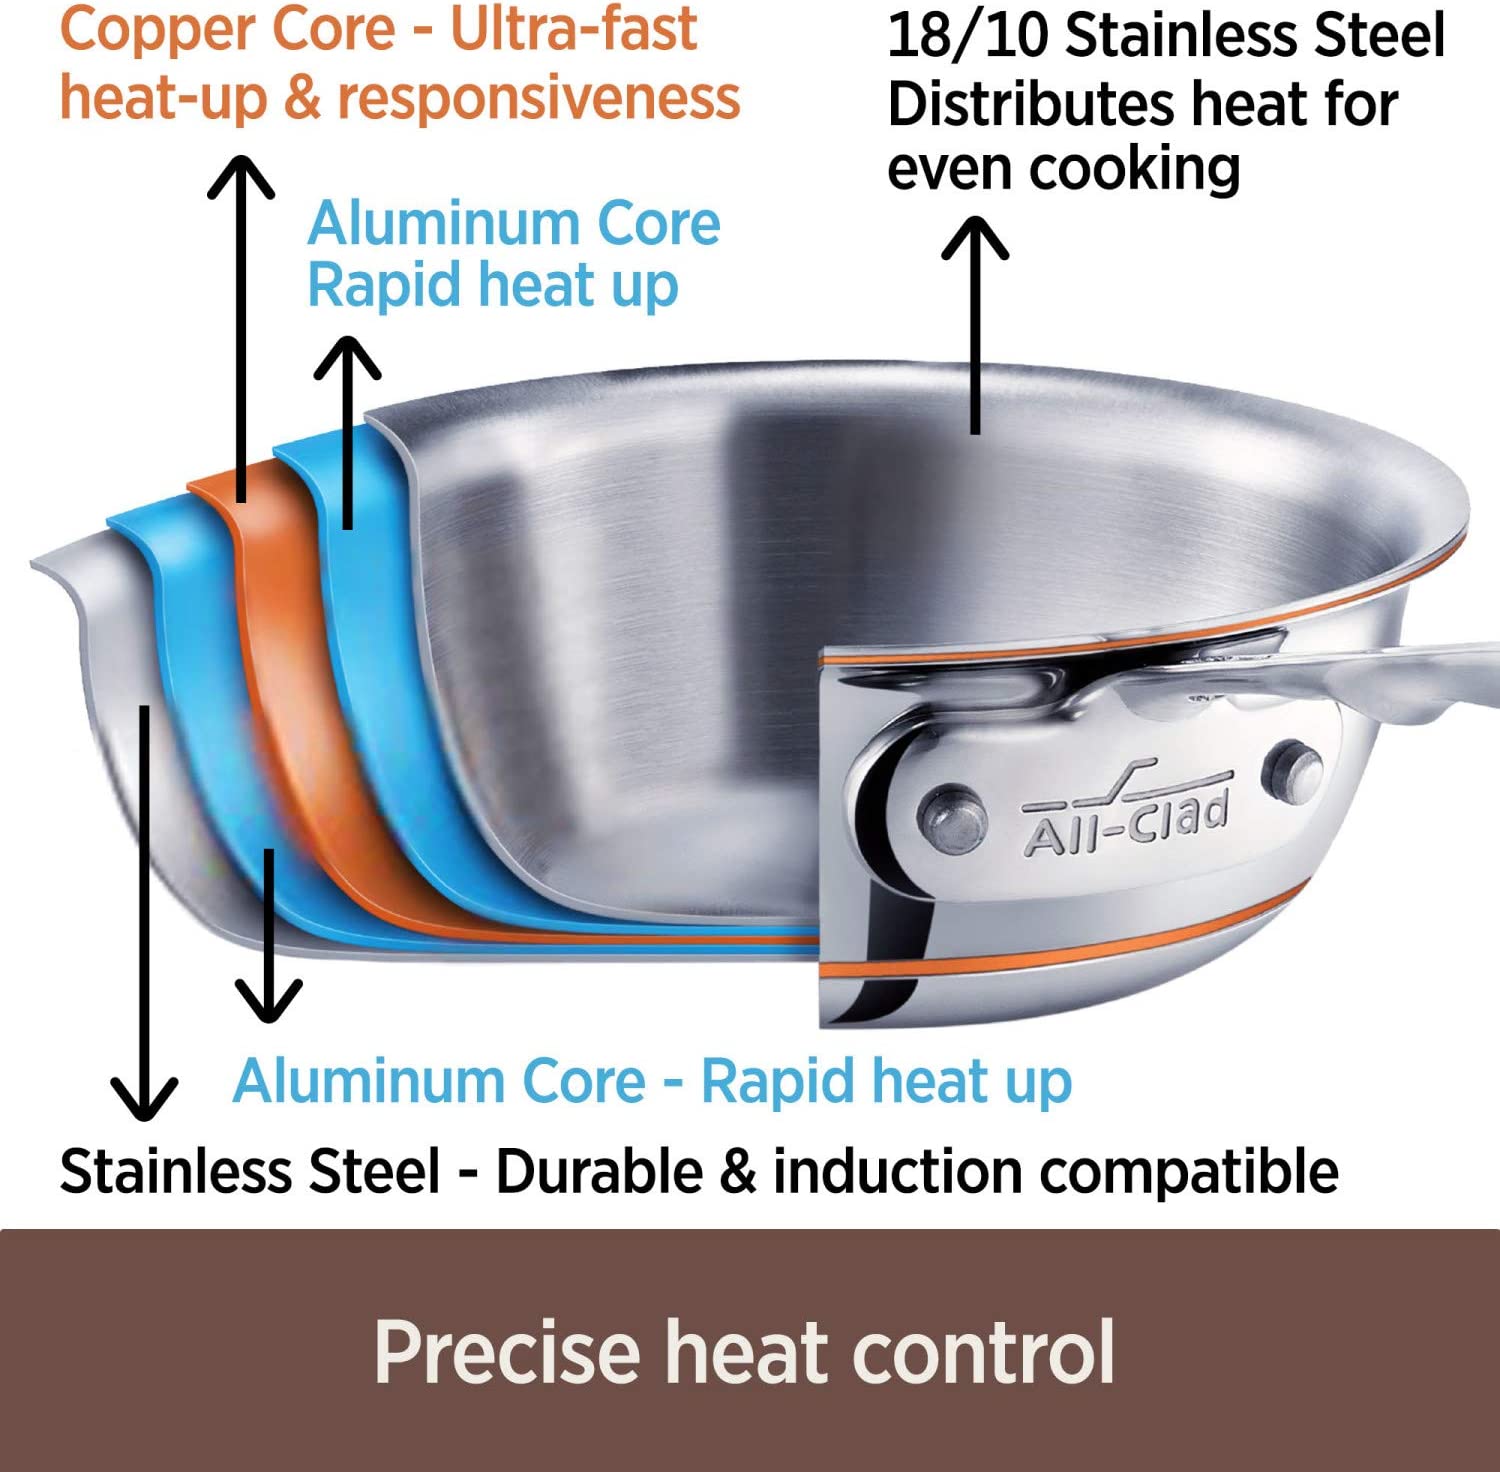 https://bigbigmart.com/wp-content/uploads/2023/08/All-Clad-Copper-Core-5-Ply-Stainless-Steel-Saucepan-with-Lid-3-Quart-Induction-Oven-Broil-Safe-600F-Pots-and-Pans-Cookware1.jpg